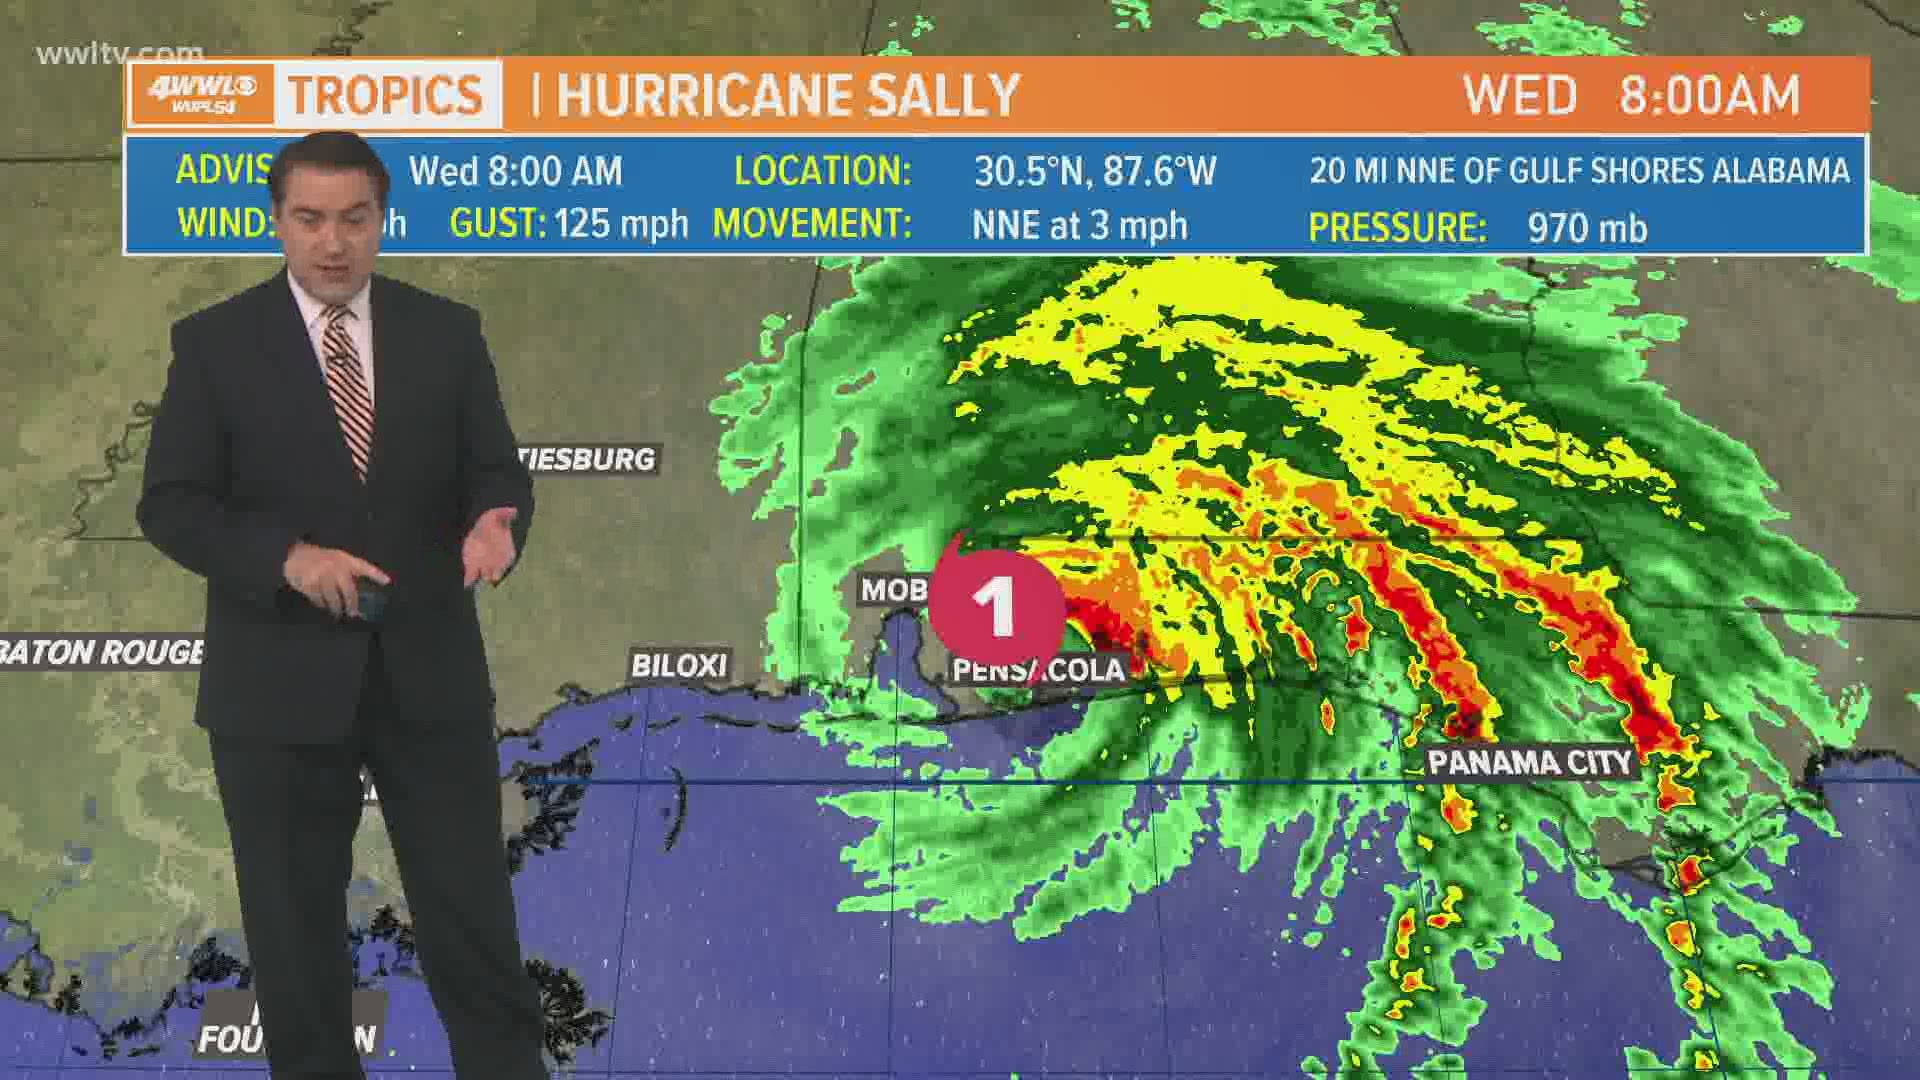 Meteorologist Dave Nussbaum has the latest update on Hurricane Sally. Plus, he says a weak front moves through Thursday & a second one Saturday with less humid air.